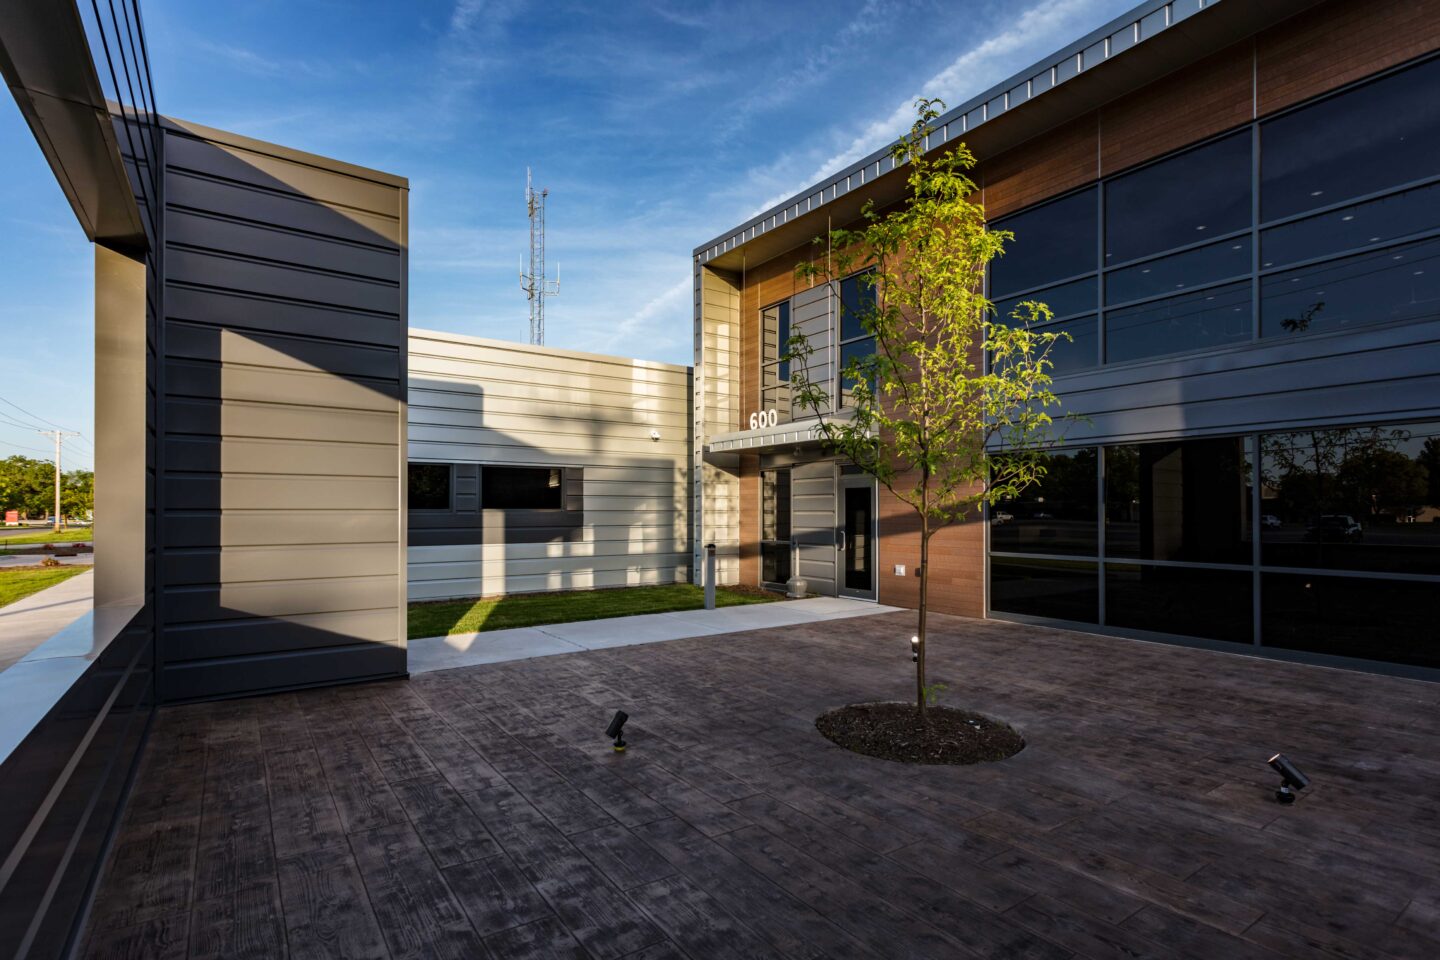 A tree grows in the middle of a courtyard area that flanks the entrance of a modern police station building